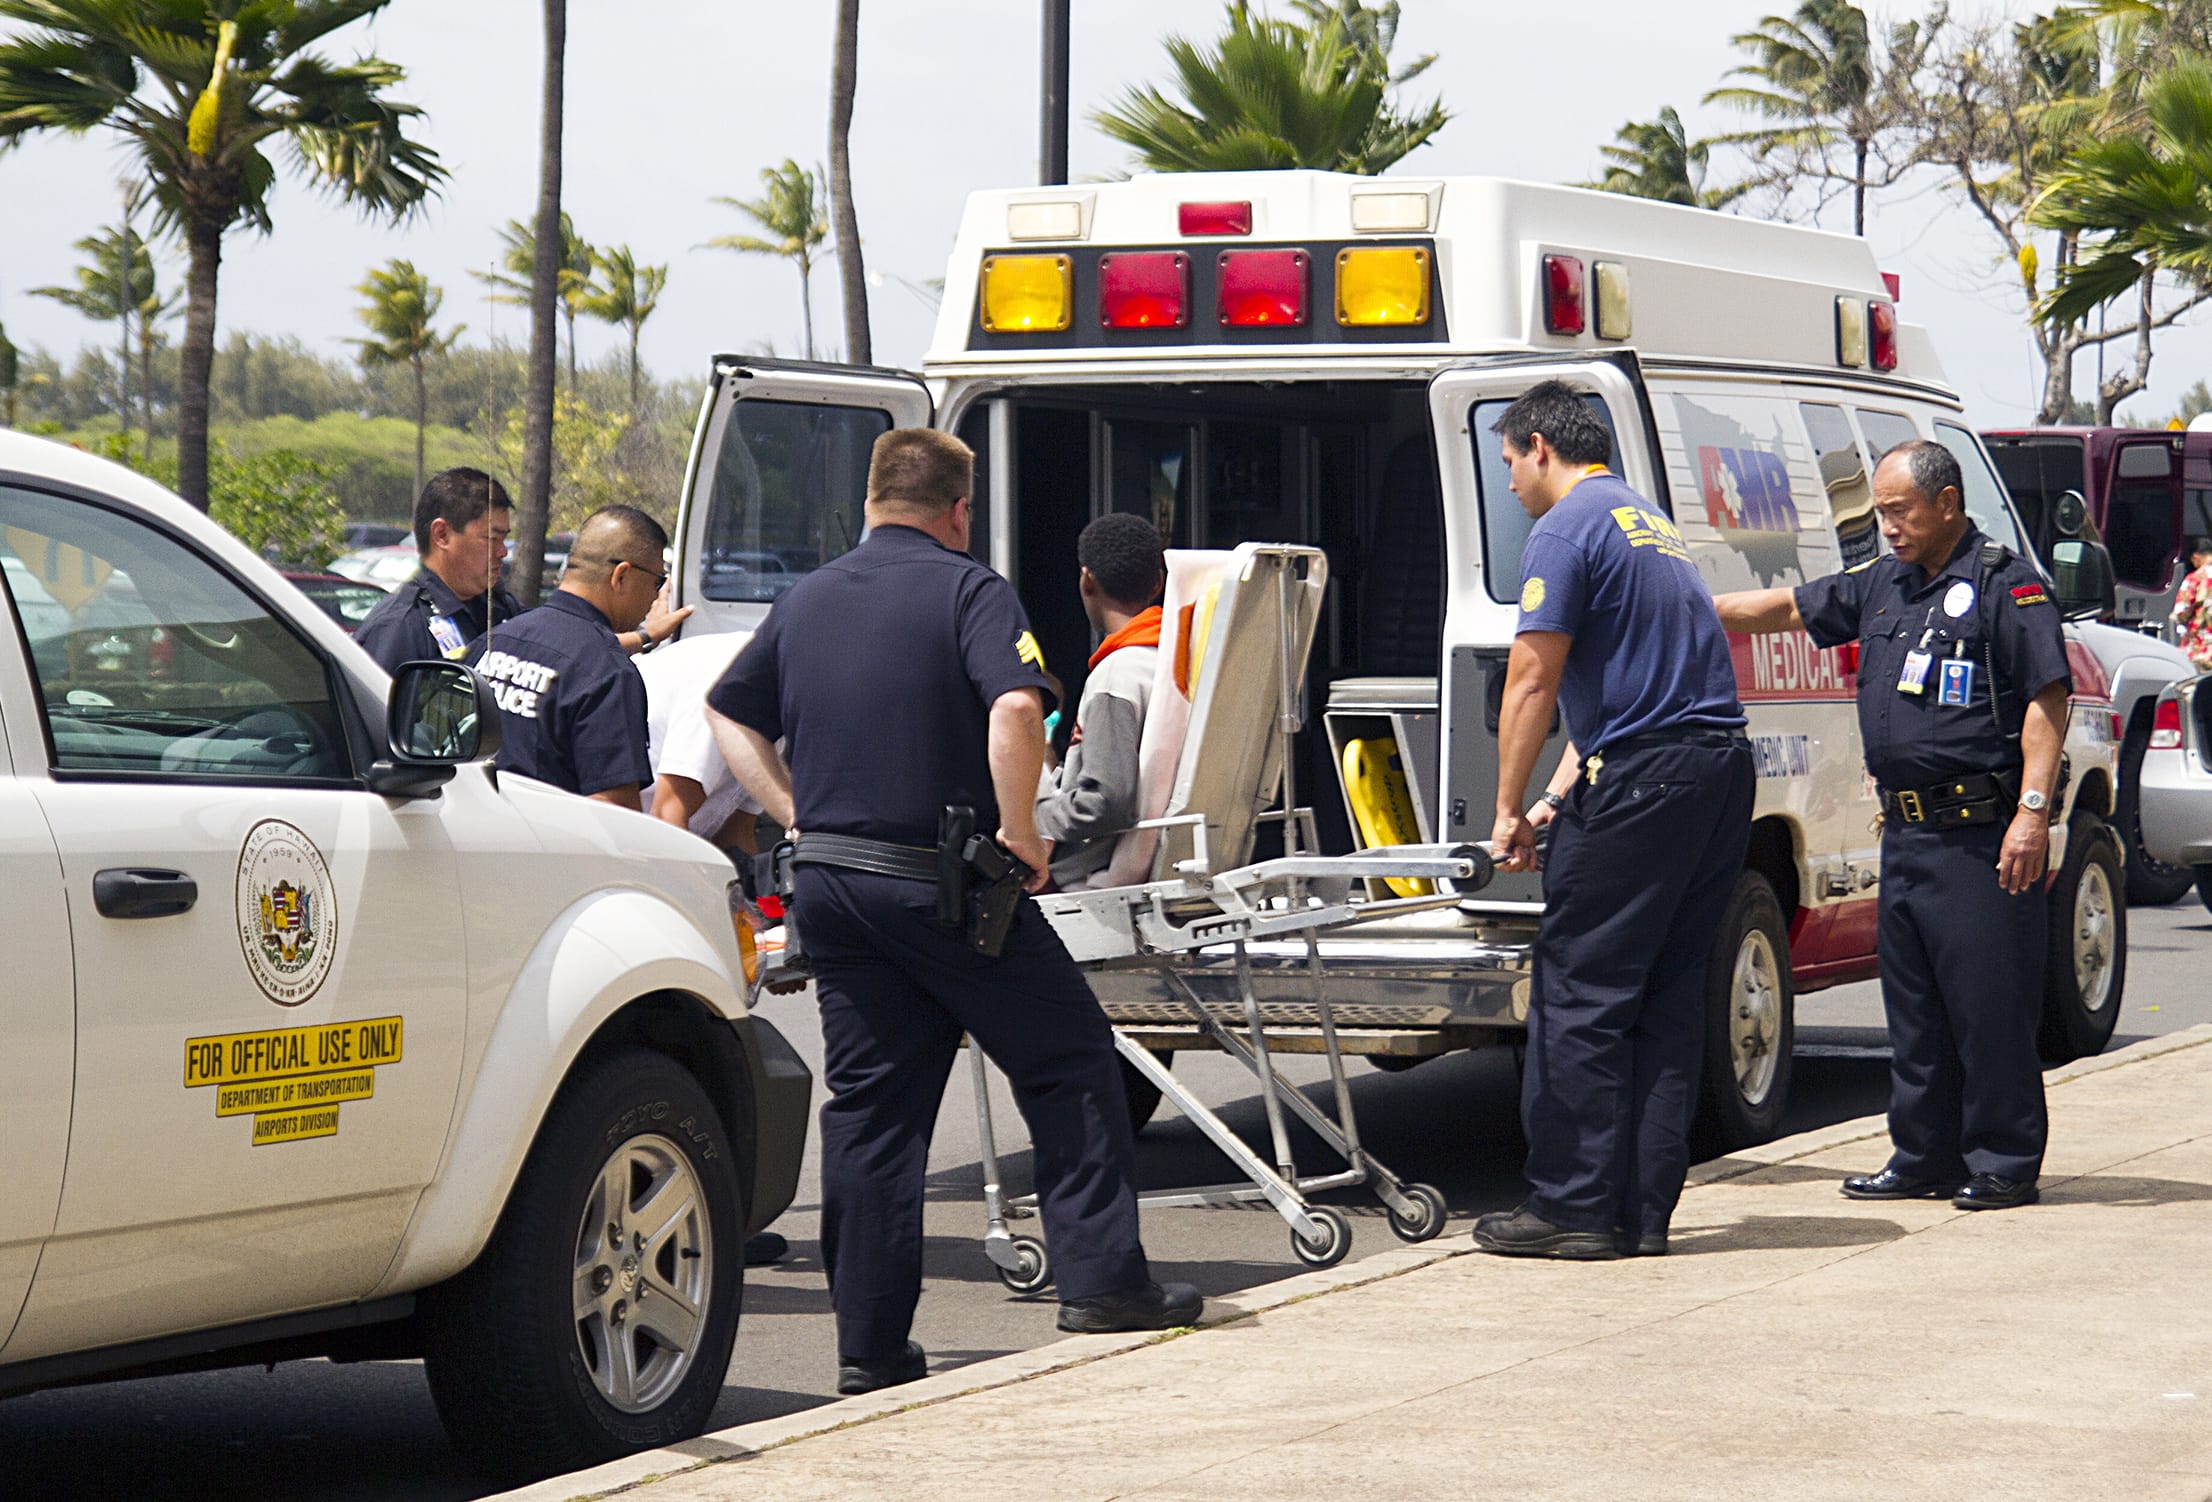 A 15-year-old boy who stowed away in the wheel well of a flight from San Jose, Calif., to Maui, on stretcher at center, is loaded into an ambulance at Kahului Airport in Kahului, Maui, Hawaii, on Sunday afternoon.